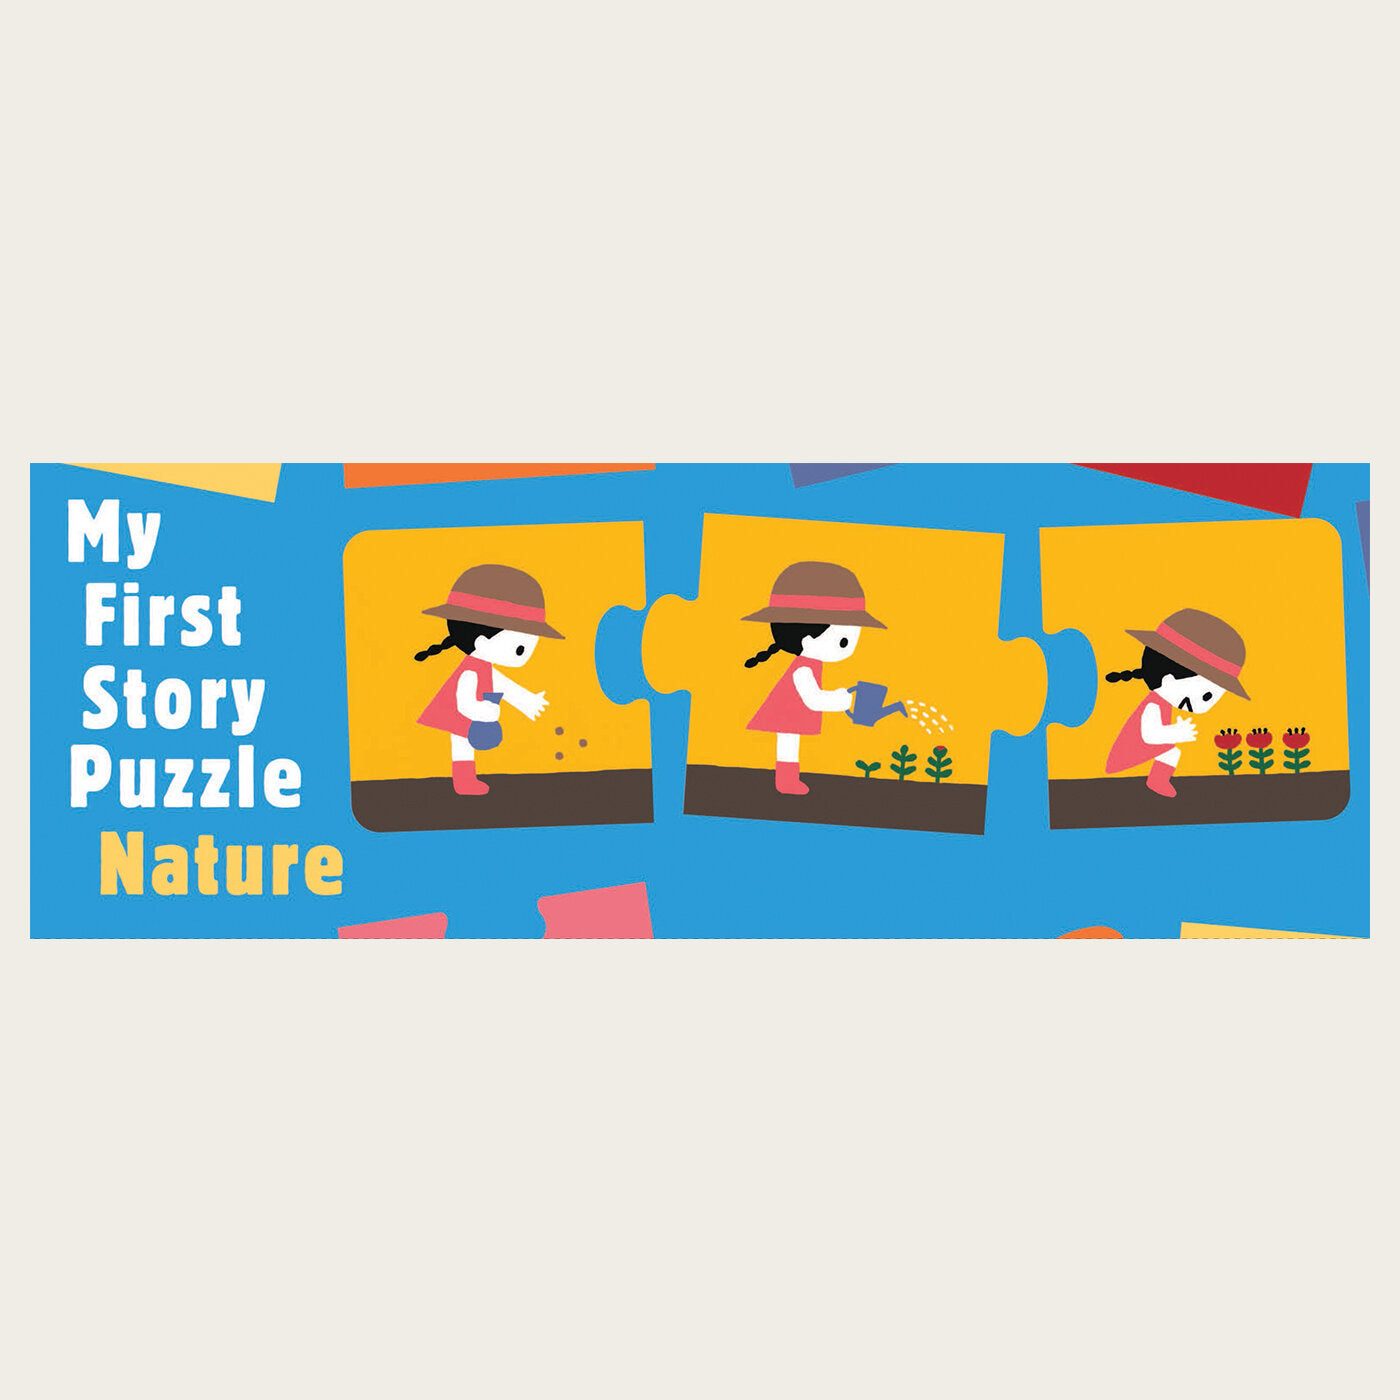 My First Story Puzzle: Nature